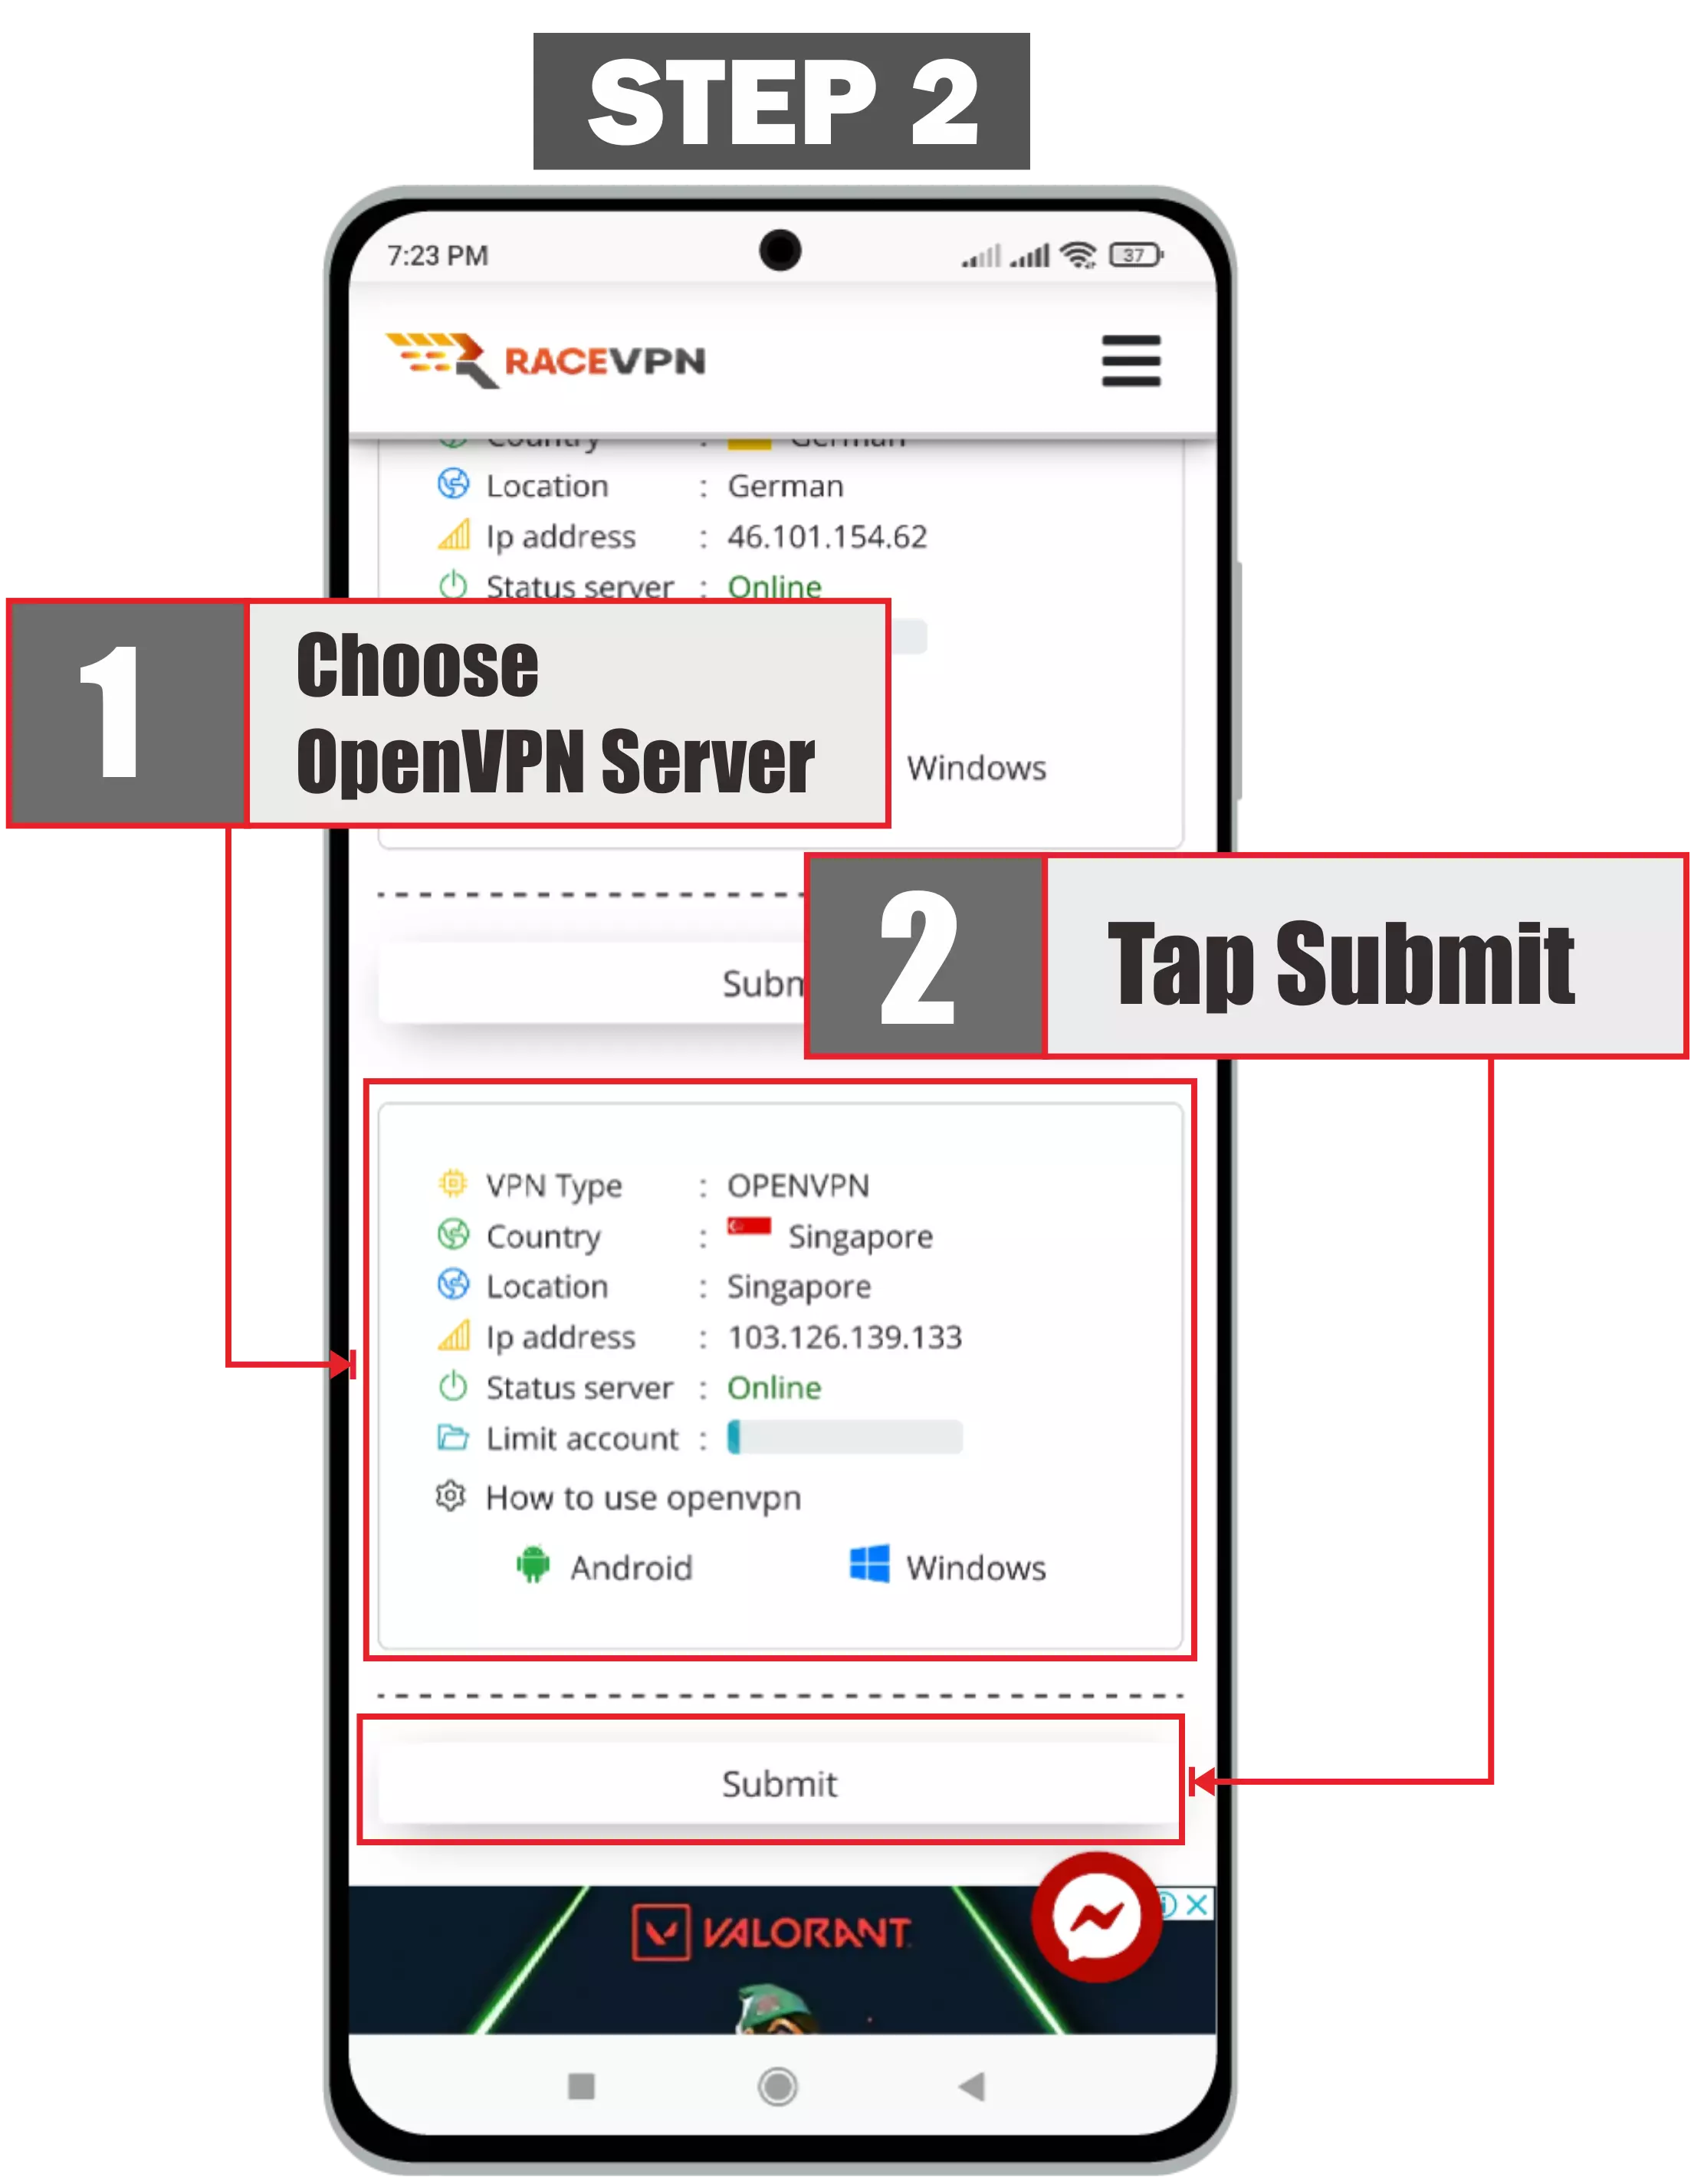 The second step is how to use openvpn on android